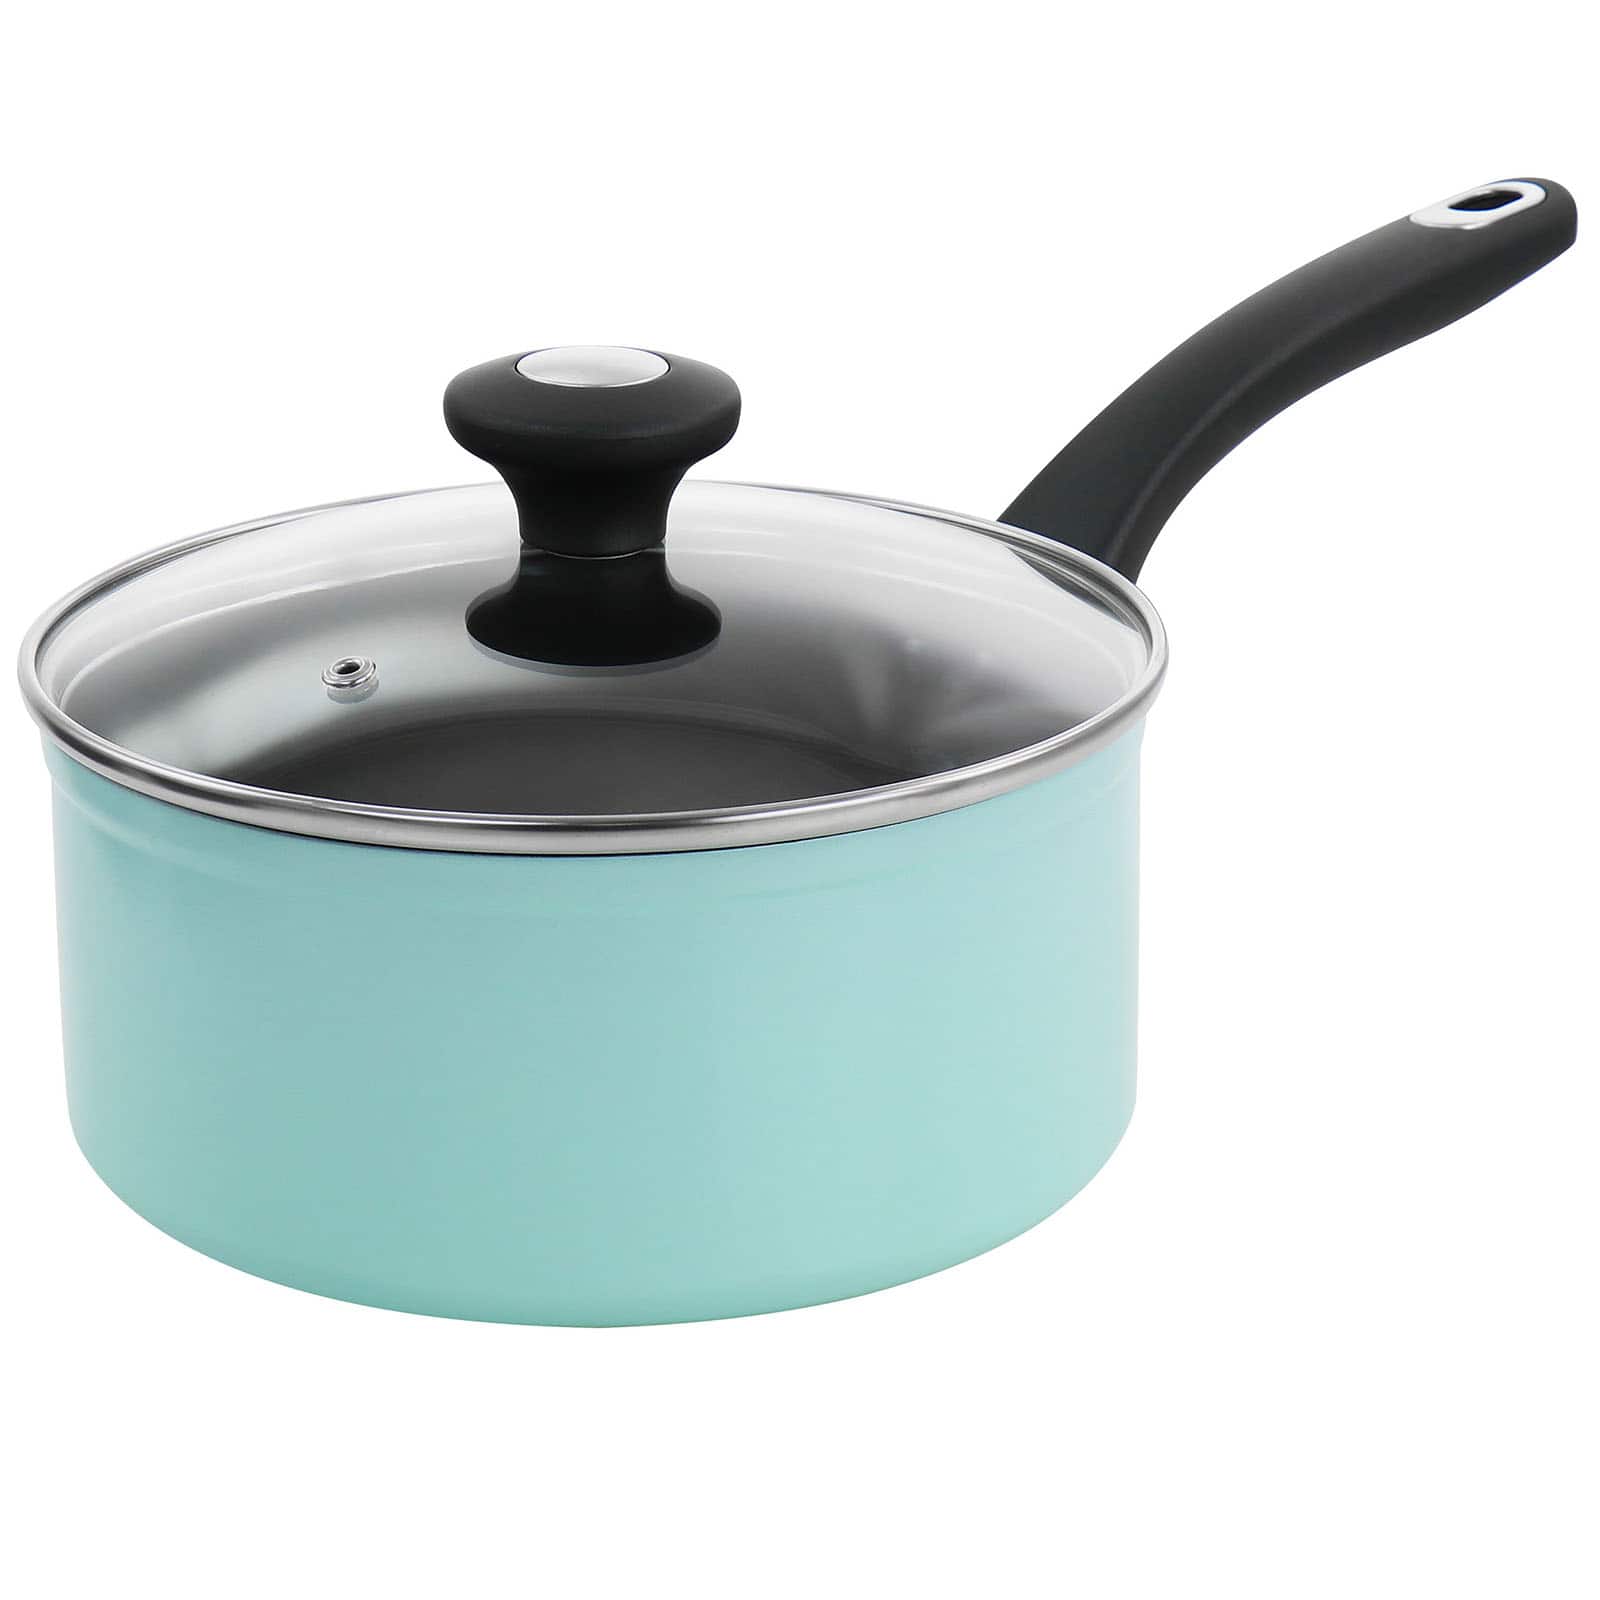 Saucepans at Everyday Low Prices 